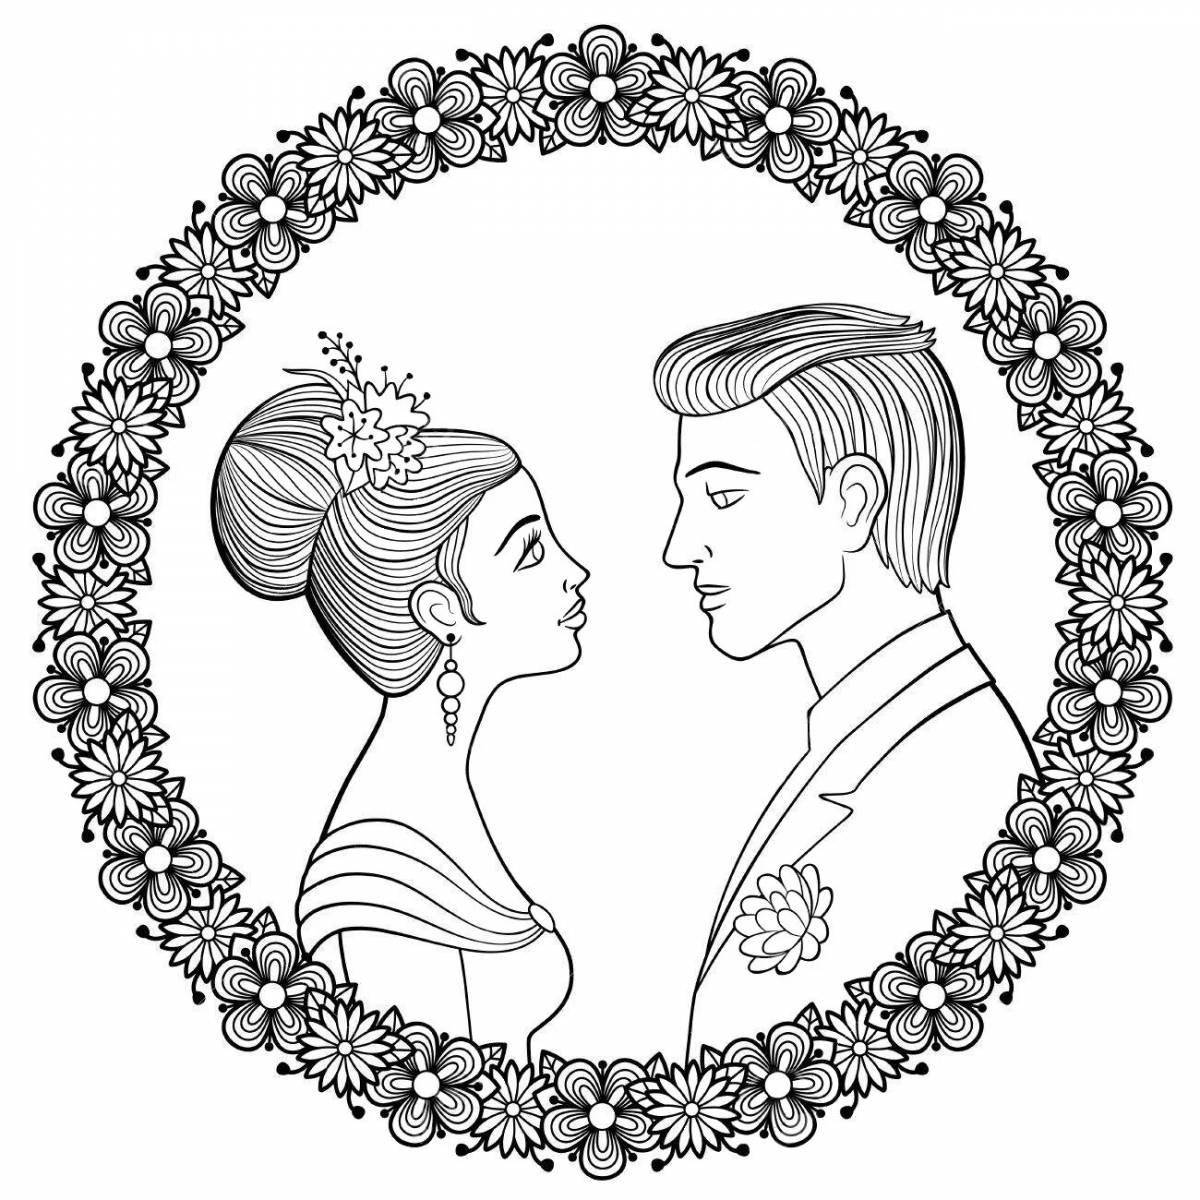 Great coloring of the bride and groom